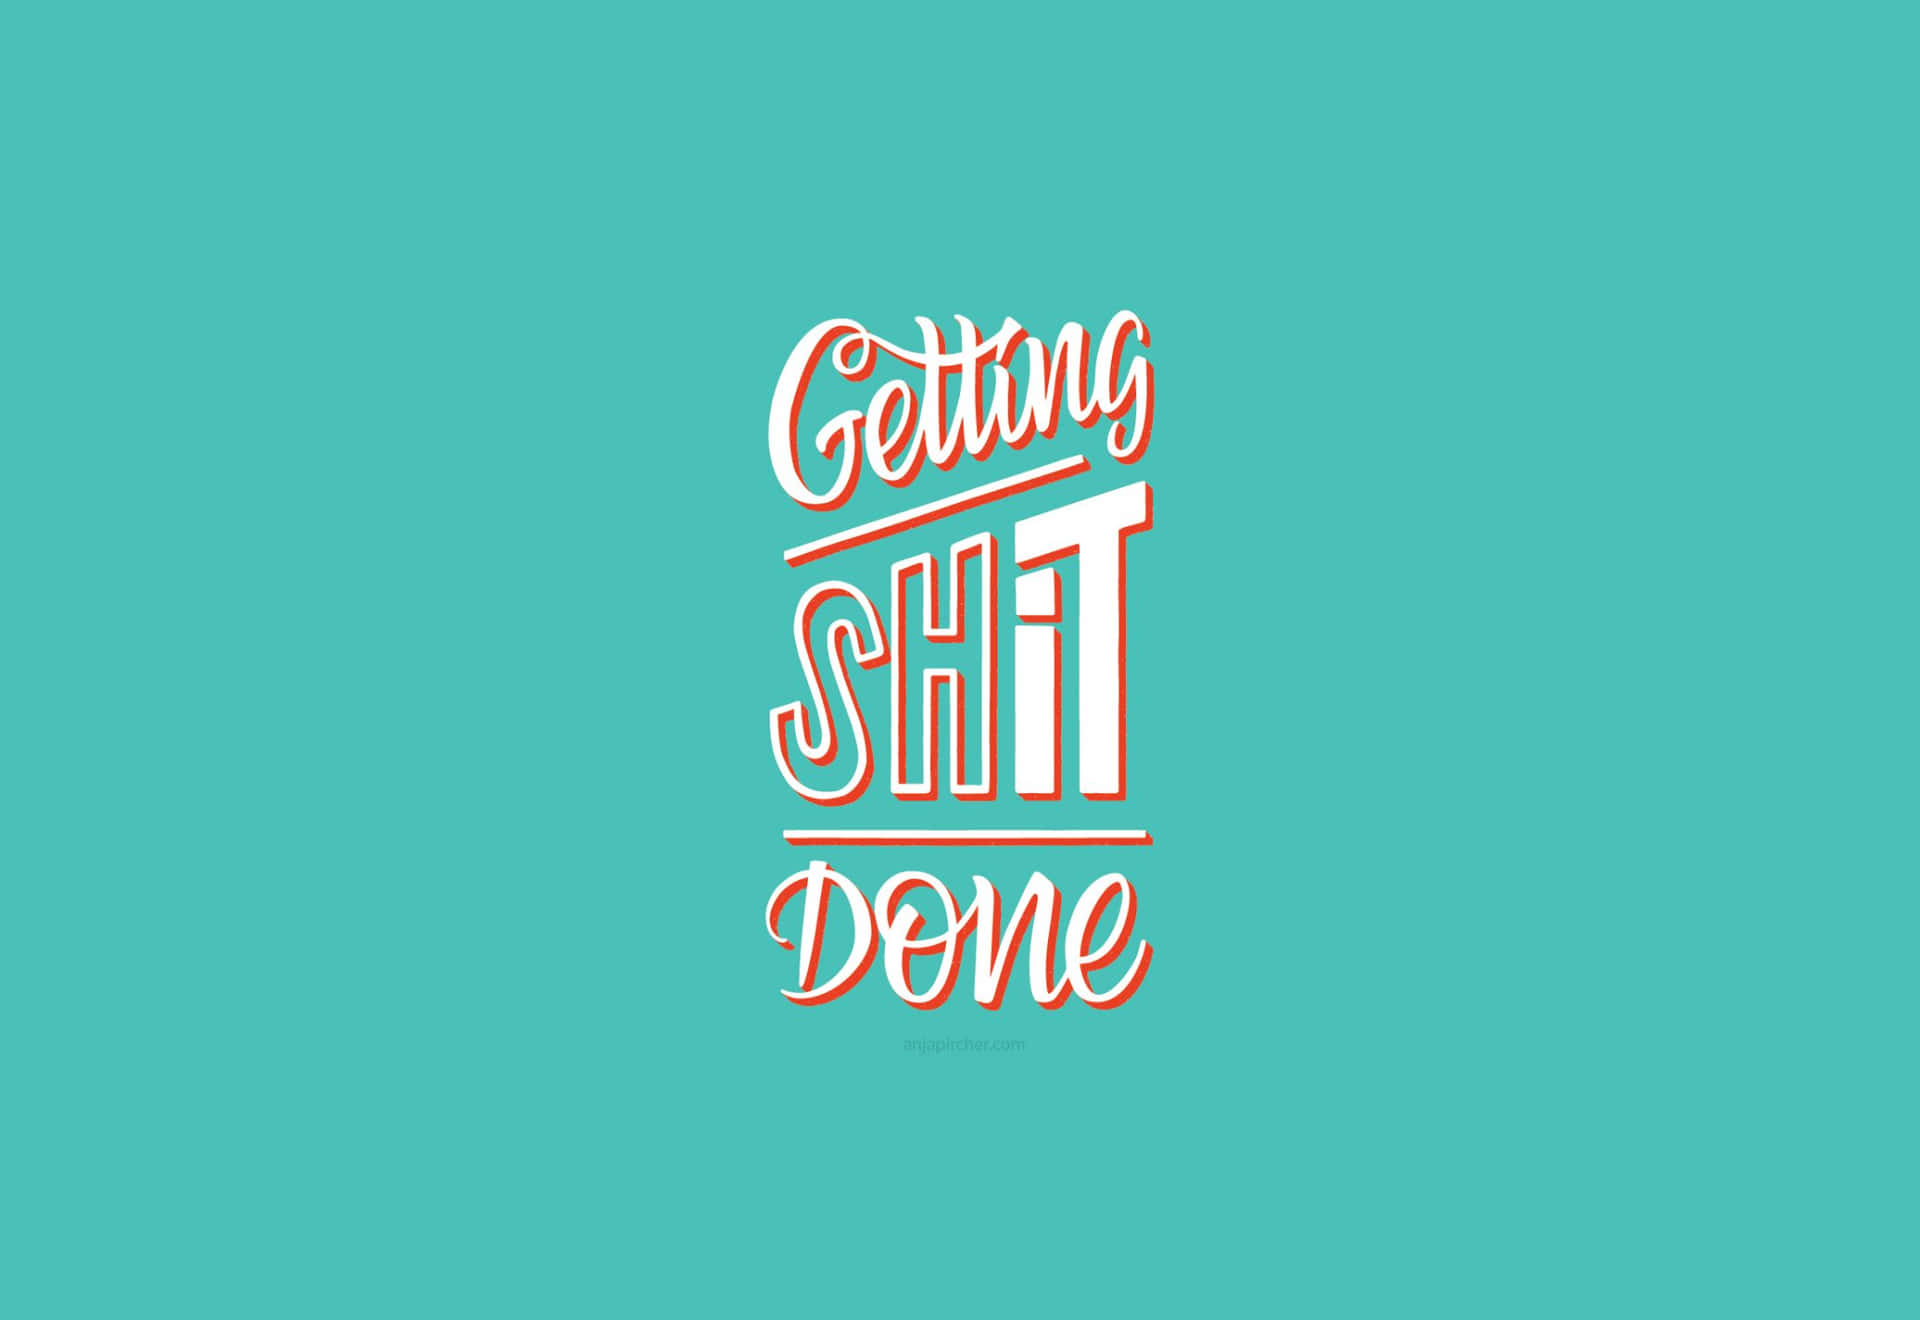 Getting Shit Done Wallpaper